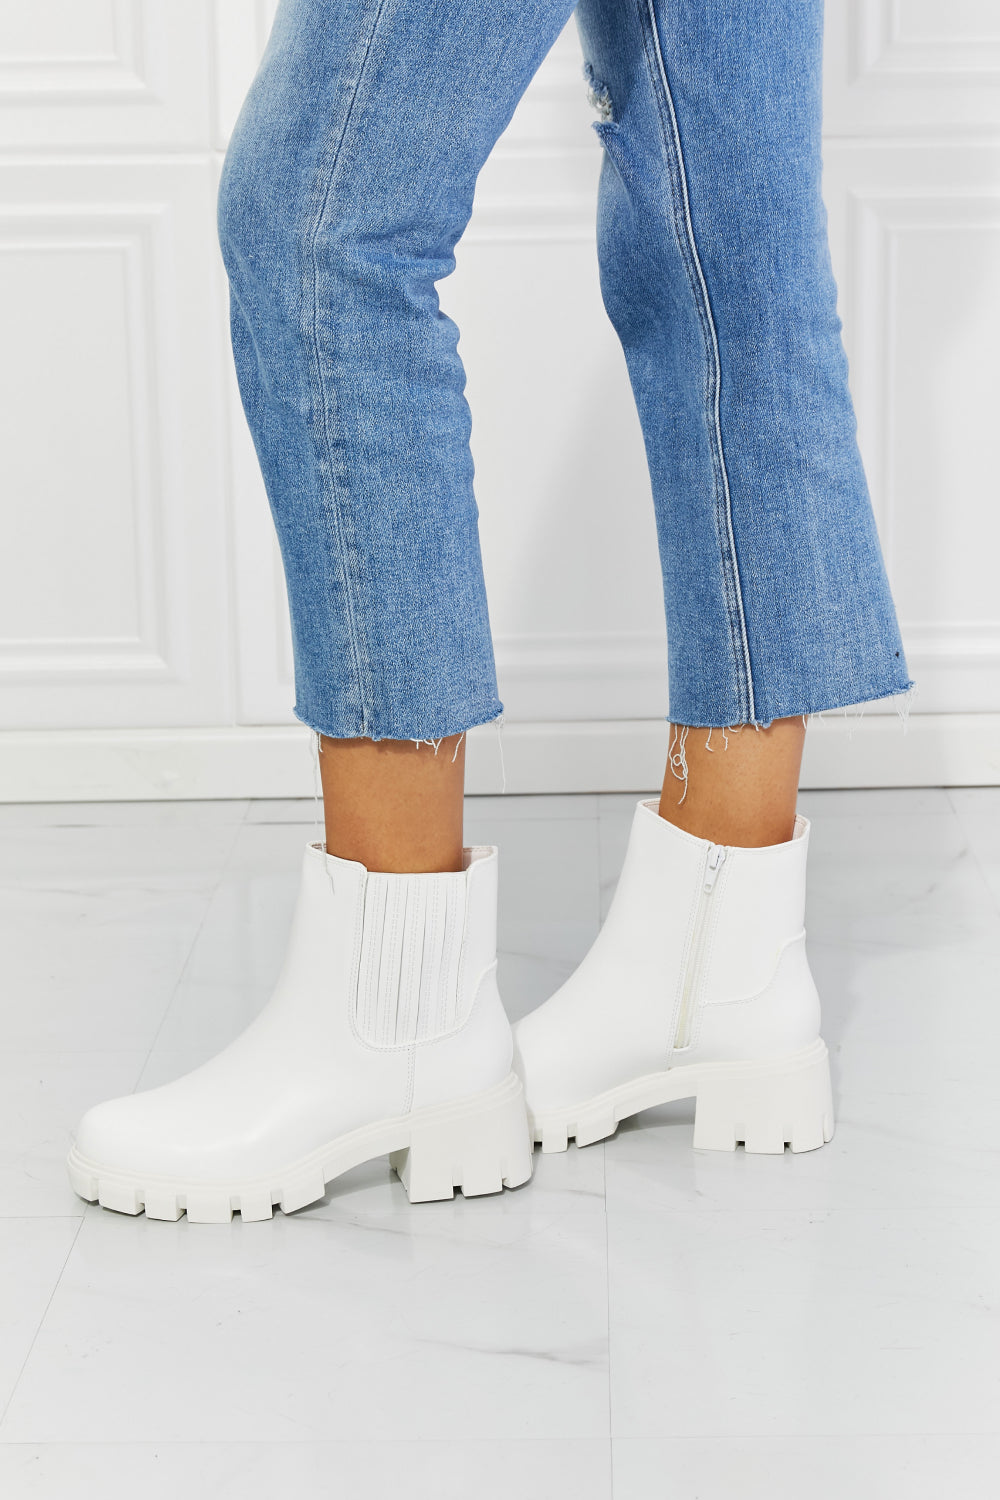 Light Gray MMShoes What It Takes Lug Sole Chelsea Boots in White Sentient Beauty Fashions shoes